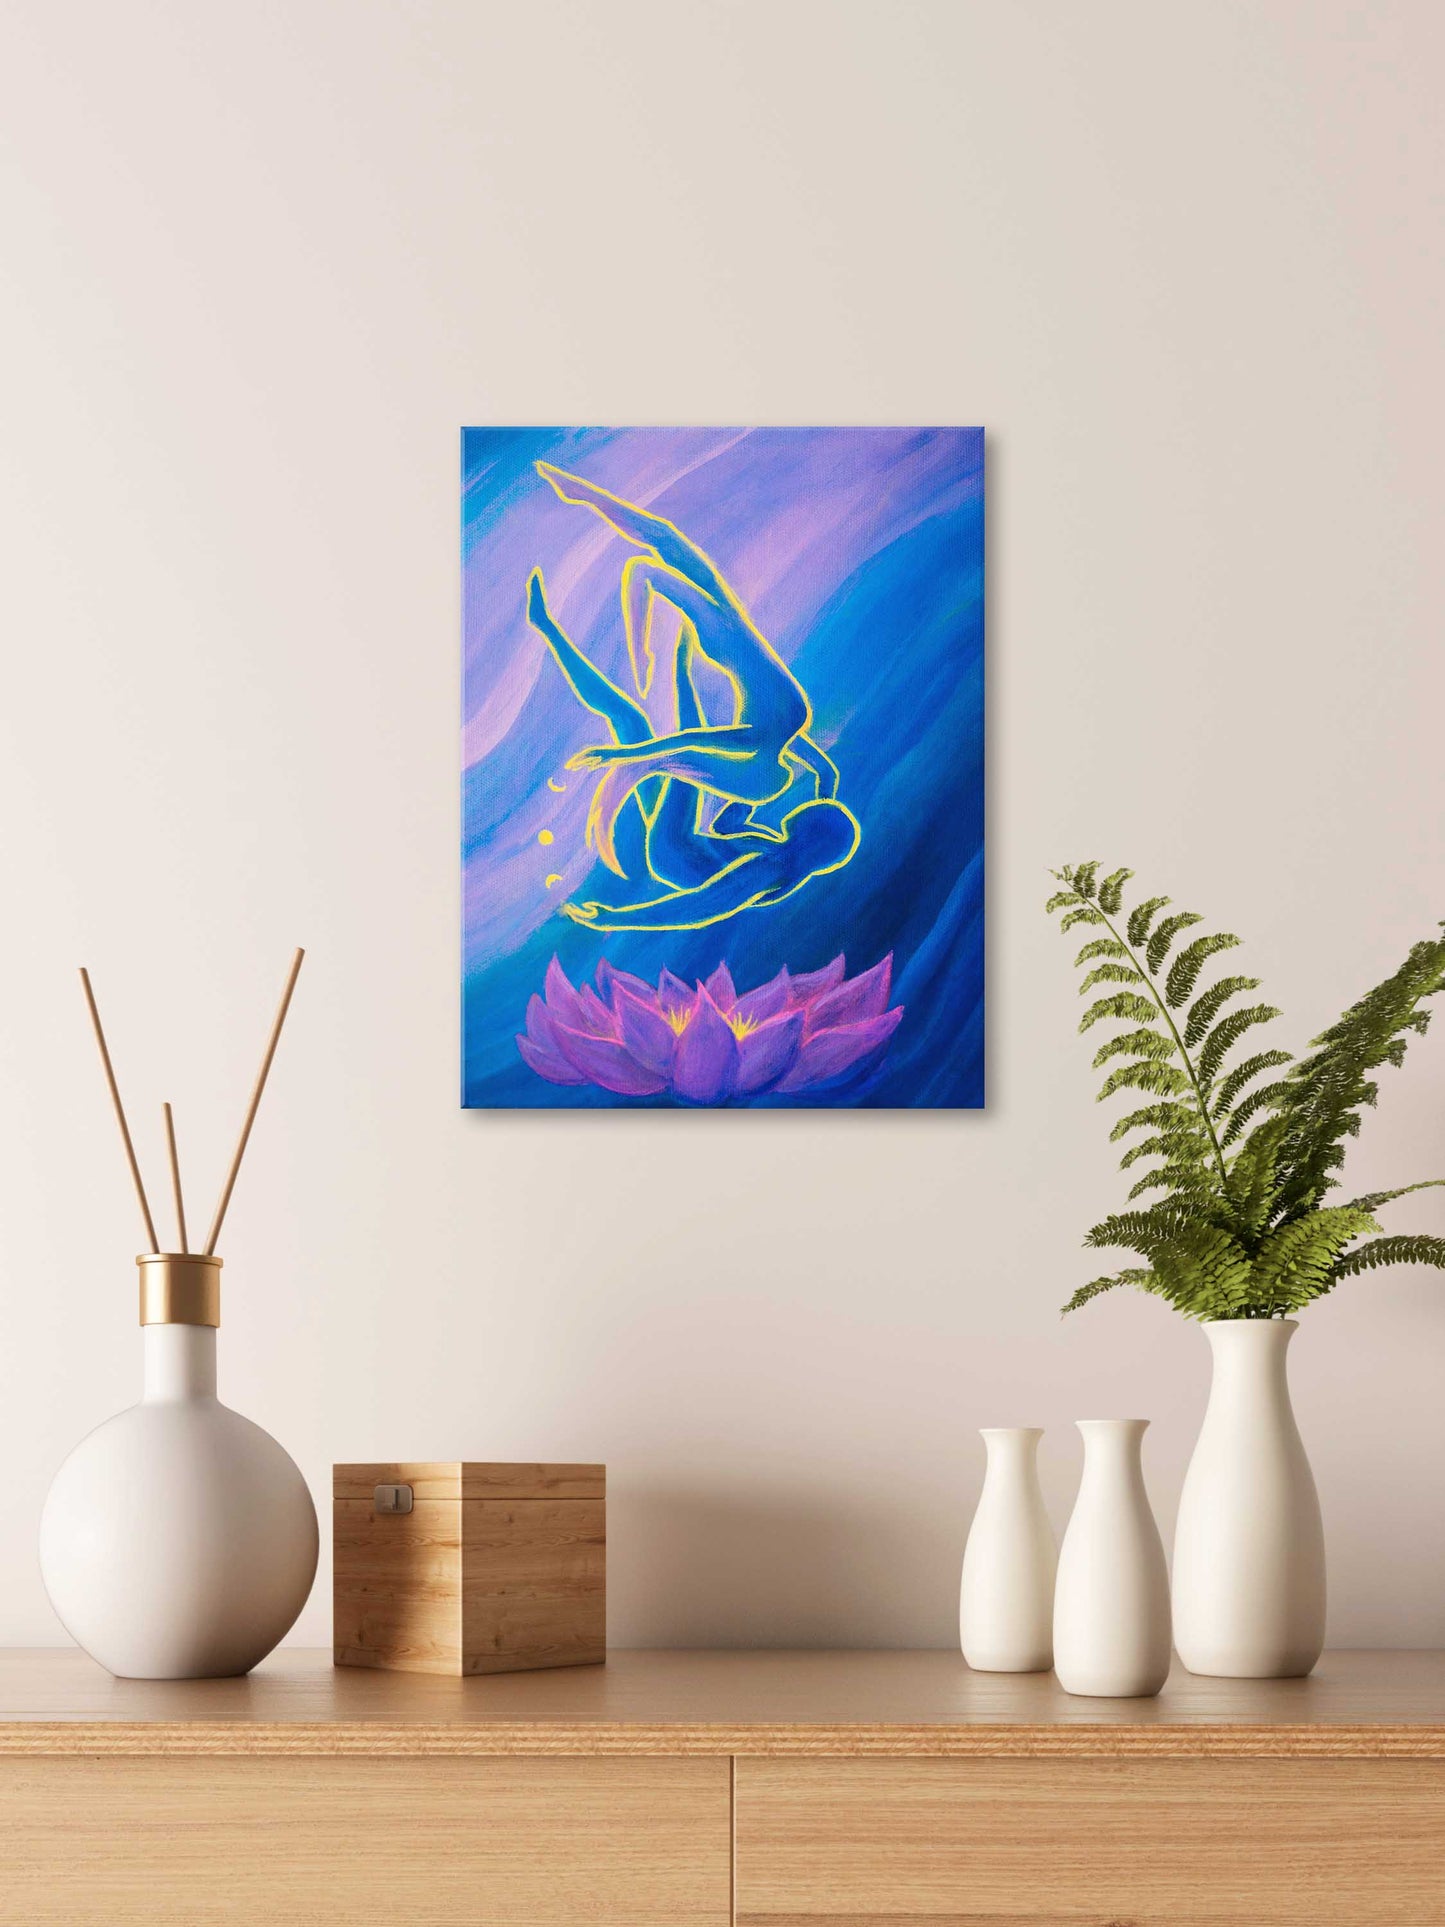 Soulmate Art, Spiritual Painting, Chakra art, Fantasy, Twin Flames Reunion, Cresent Moon phases, magical and Romantic gift with Lotus Flower, Acrylic painting on canvas